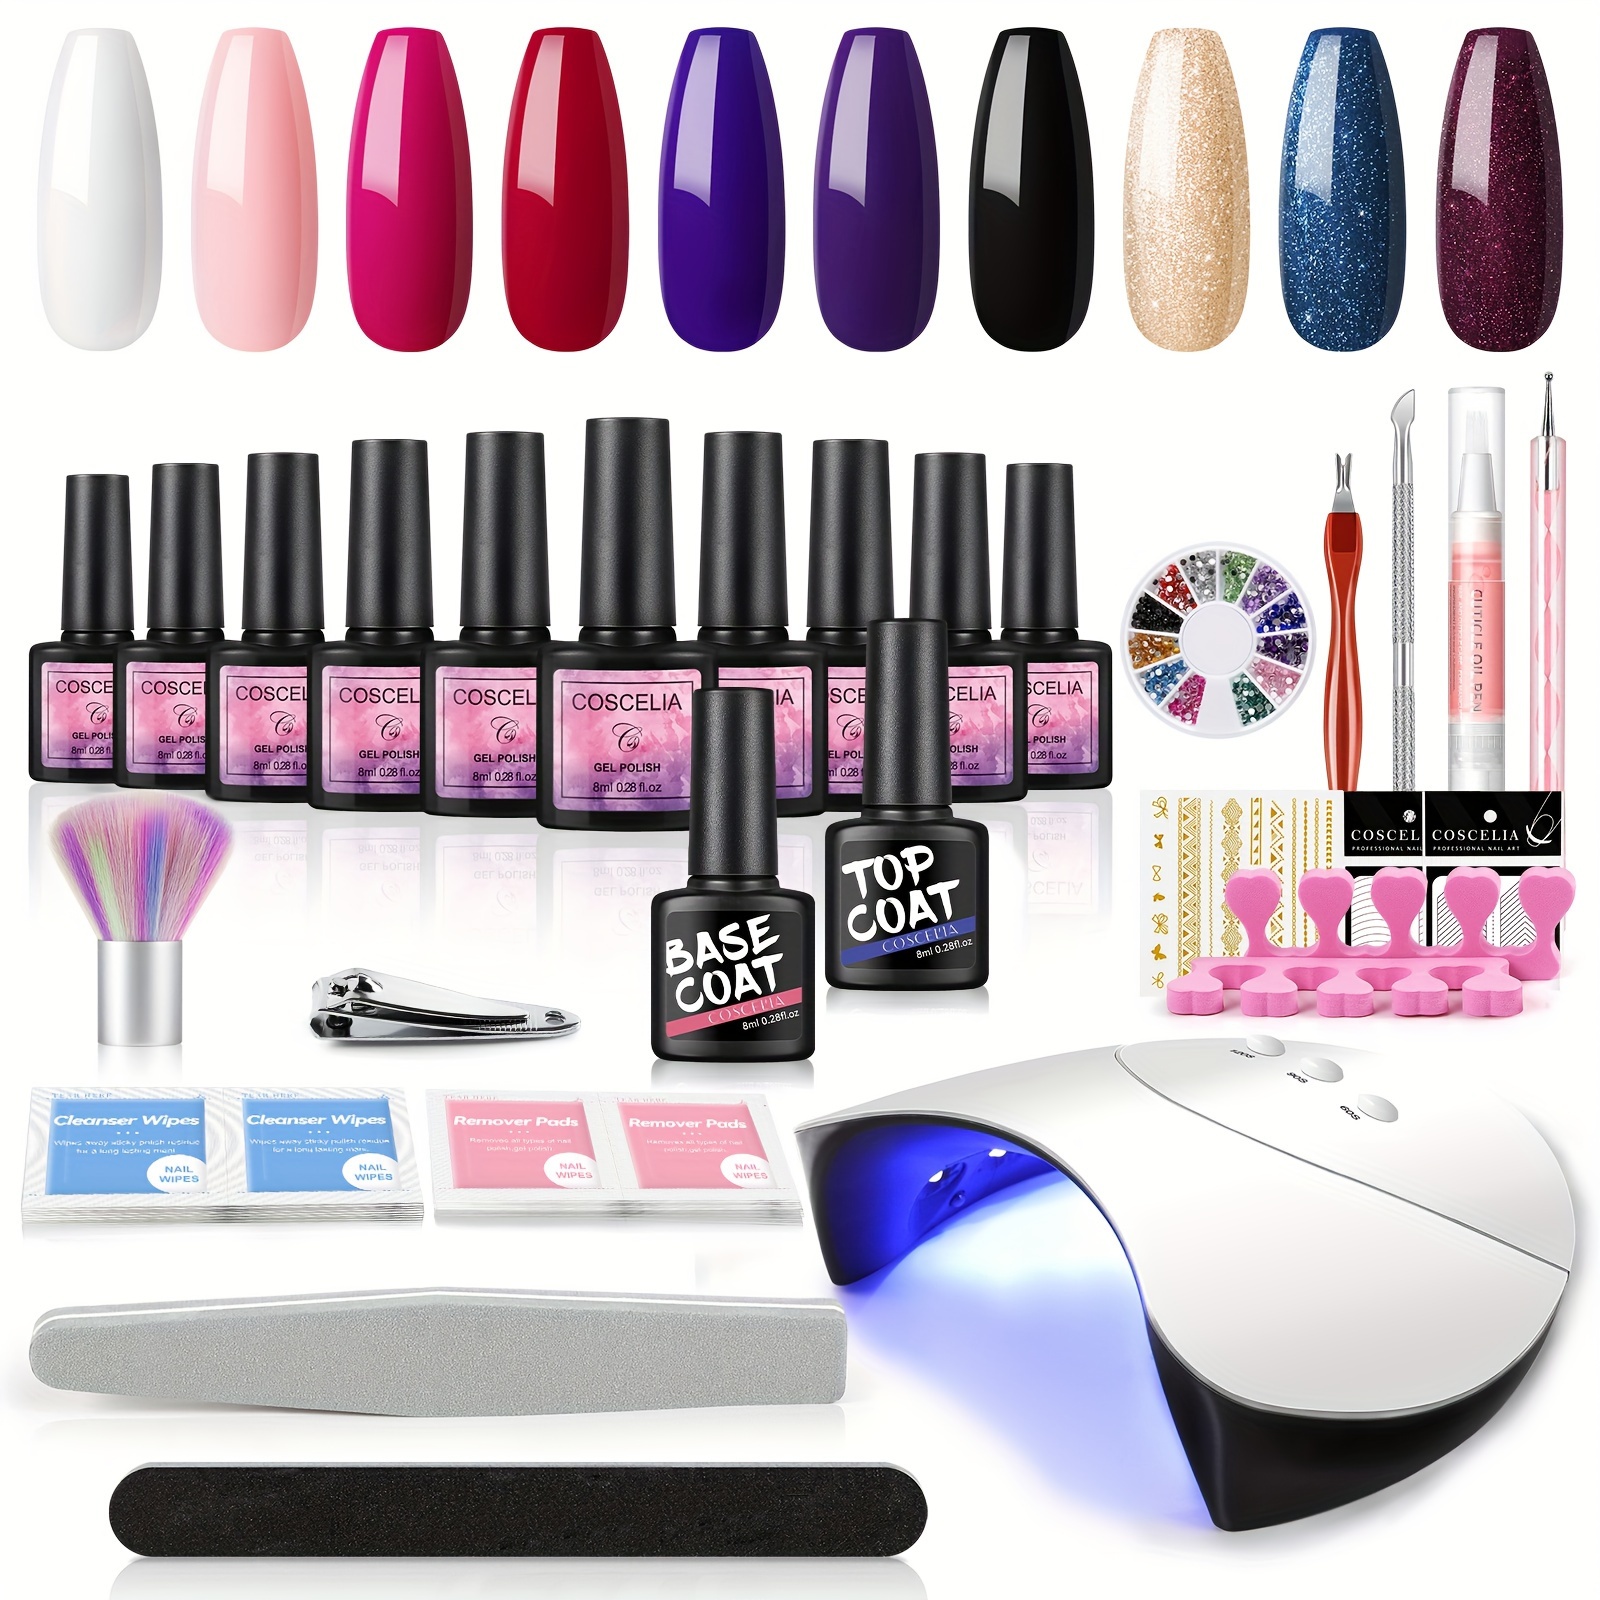 

Gel Nail Polish Kit With U V Light 10 Color Gel Nail Kit With Top Base Coat Nail Dryer Nail Rhinestone Manicure Tools All-in-one Nail Art Starter Kit For Salon Beginner Home Diy